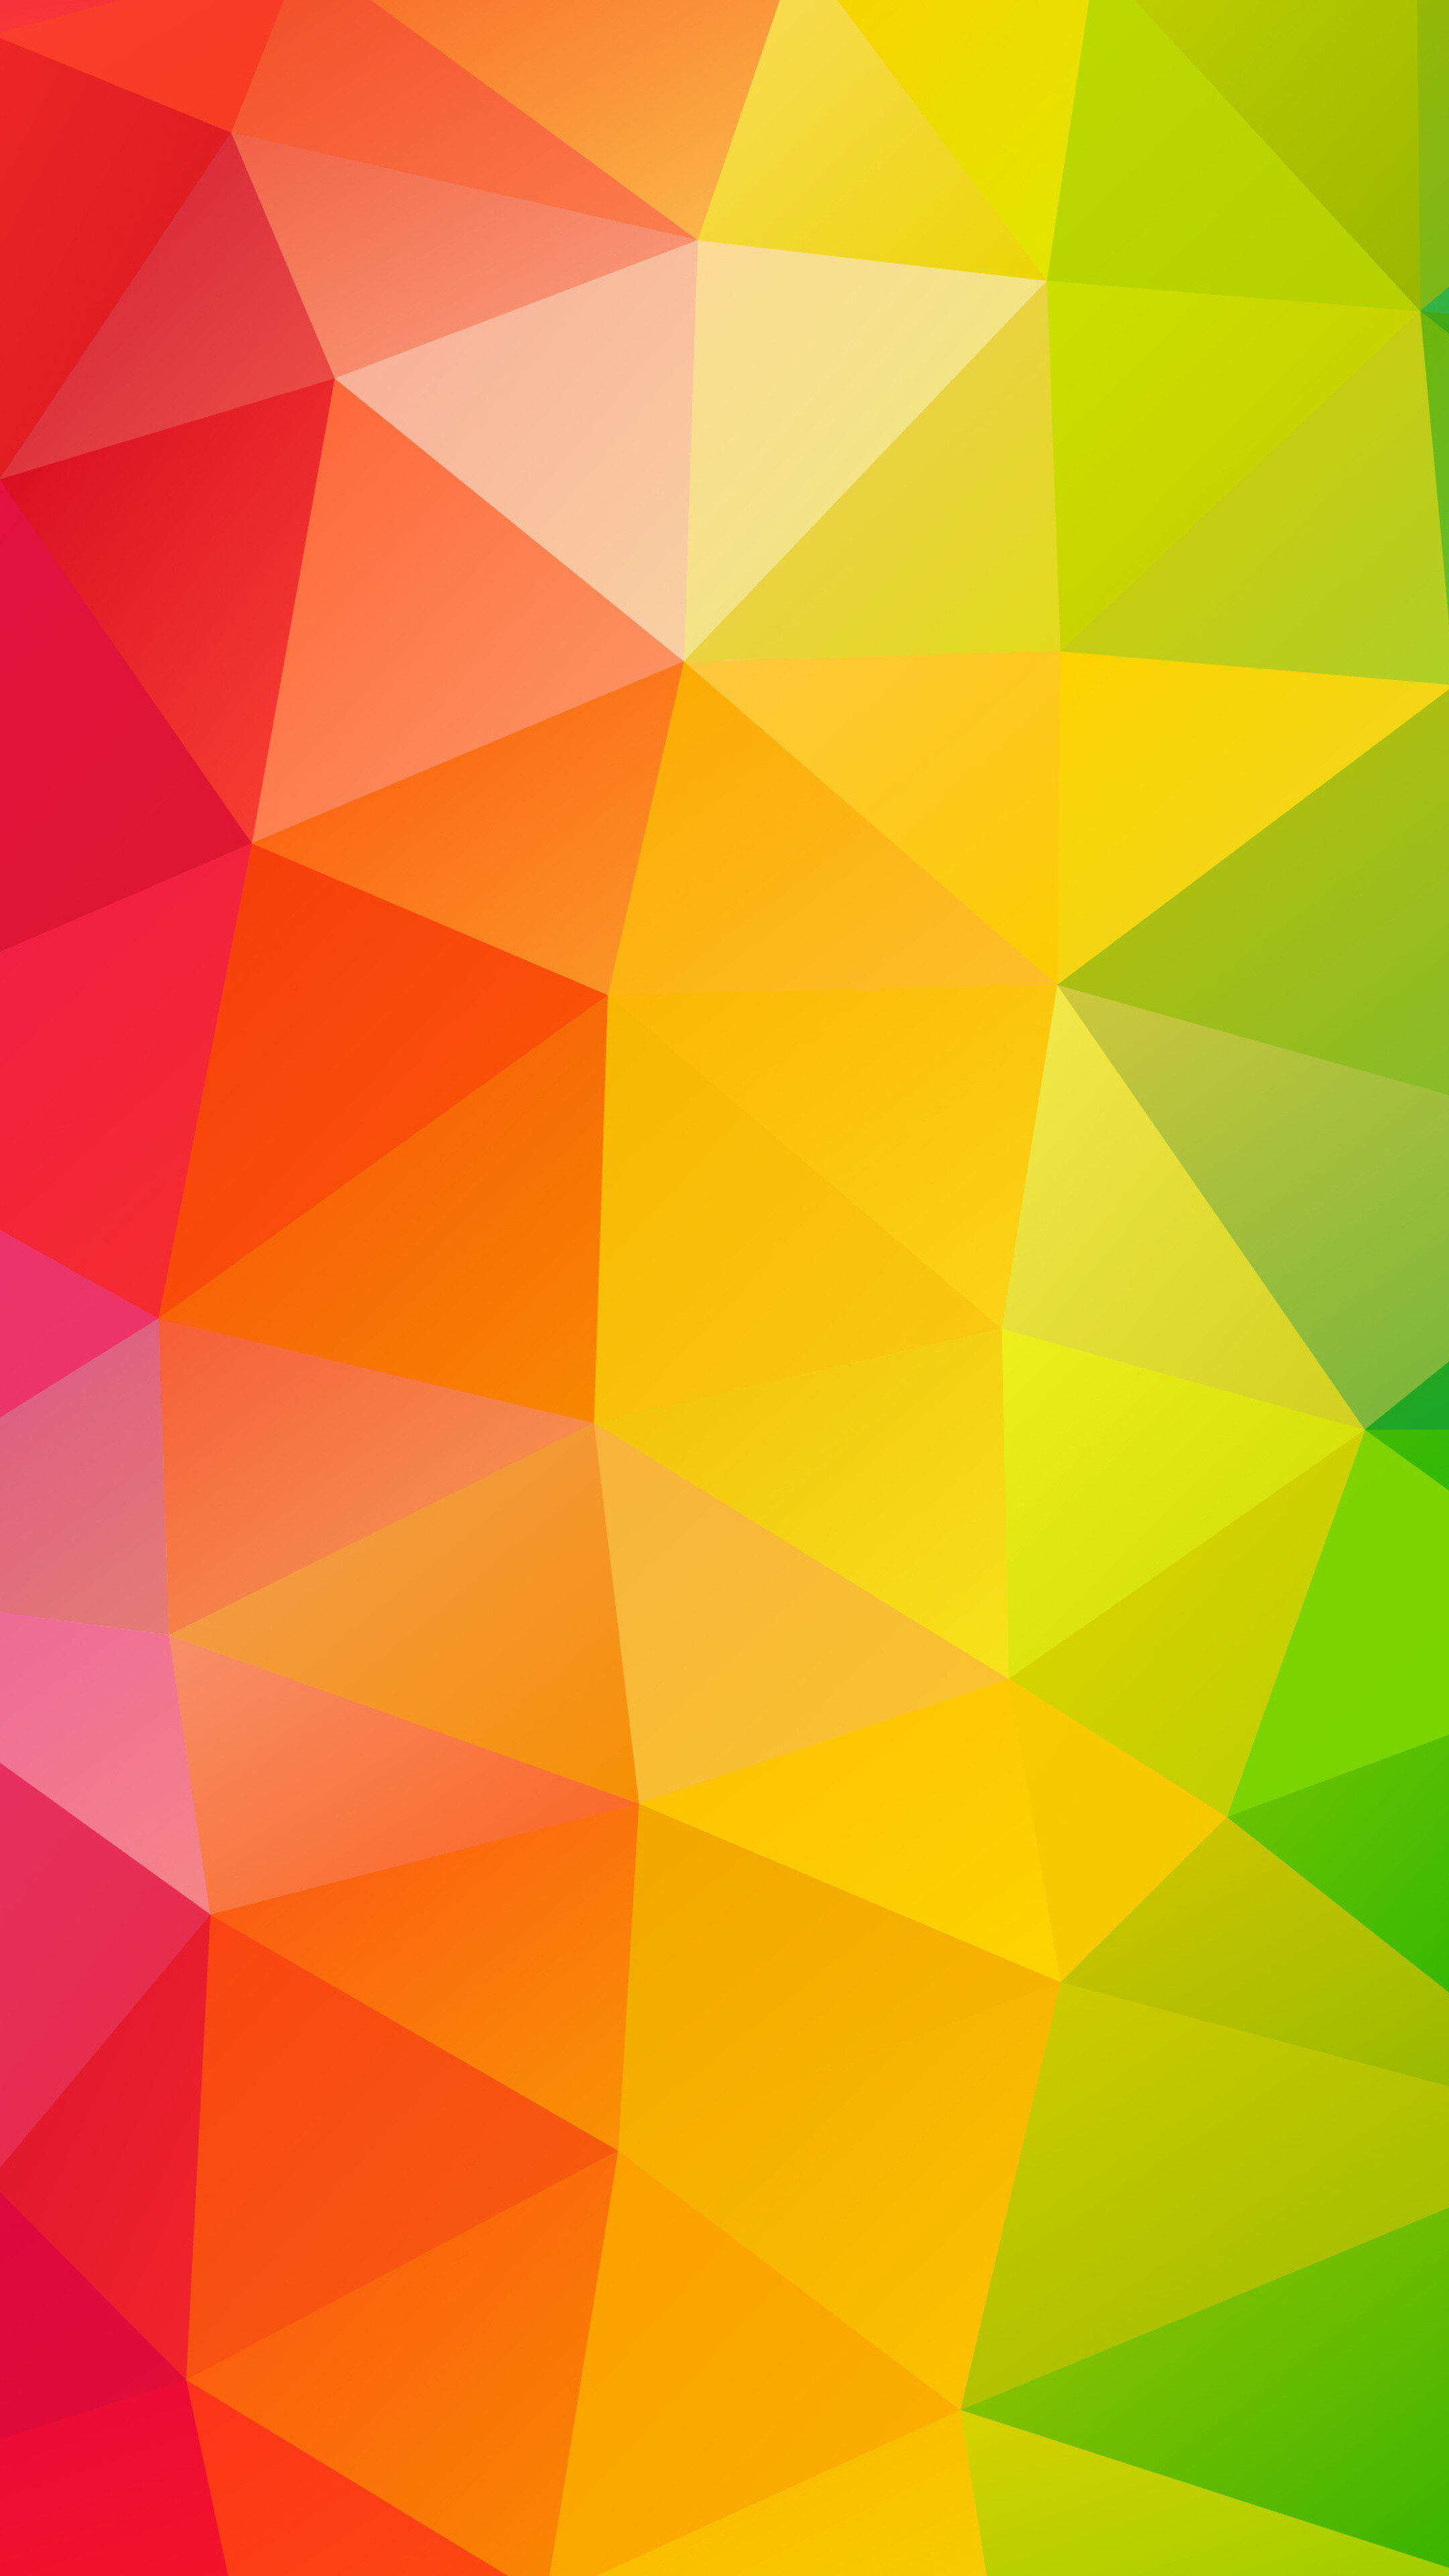 Triangle: Colorful polygonal figures, Mosaic, Supplementary angles. 2160x3840 4K Wallpaper.